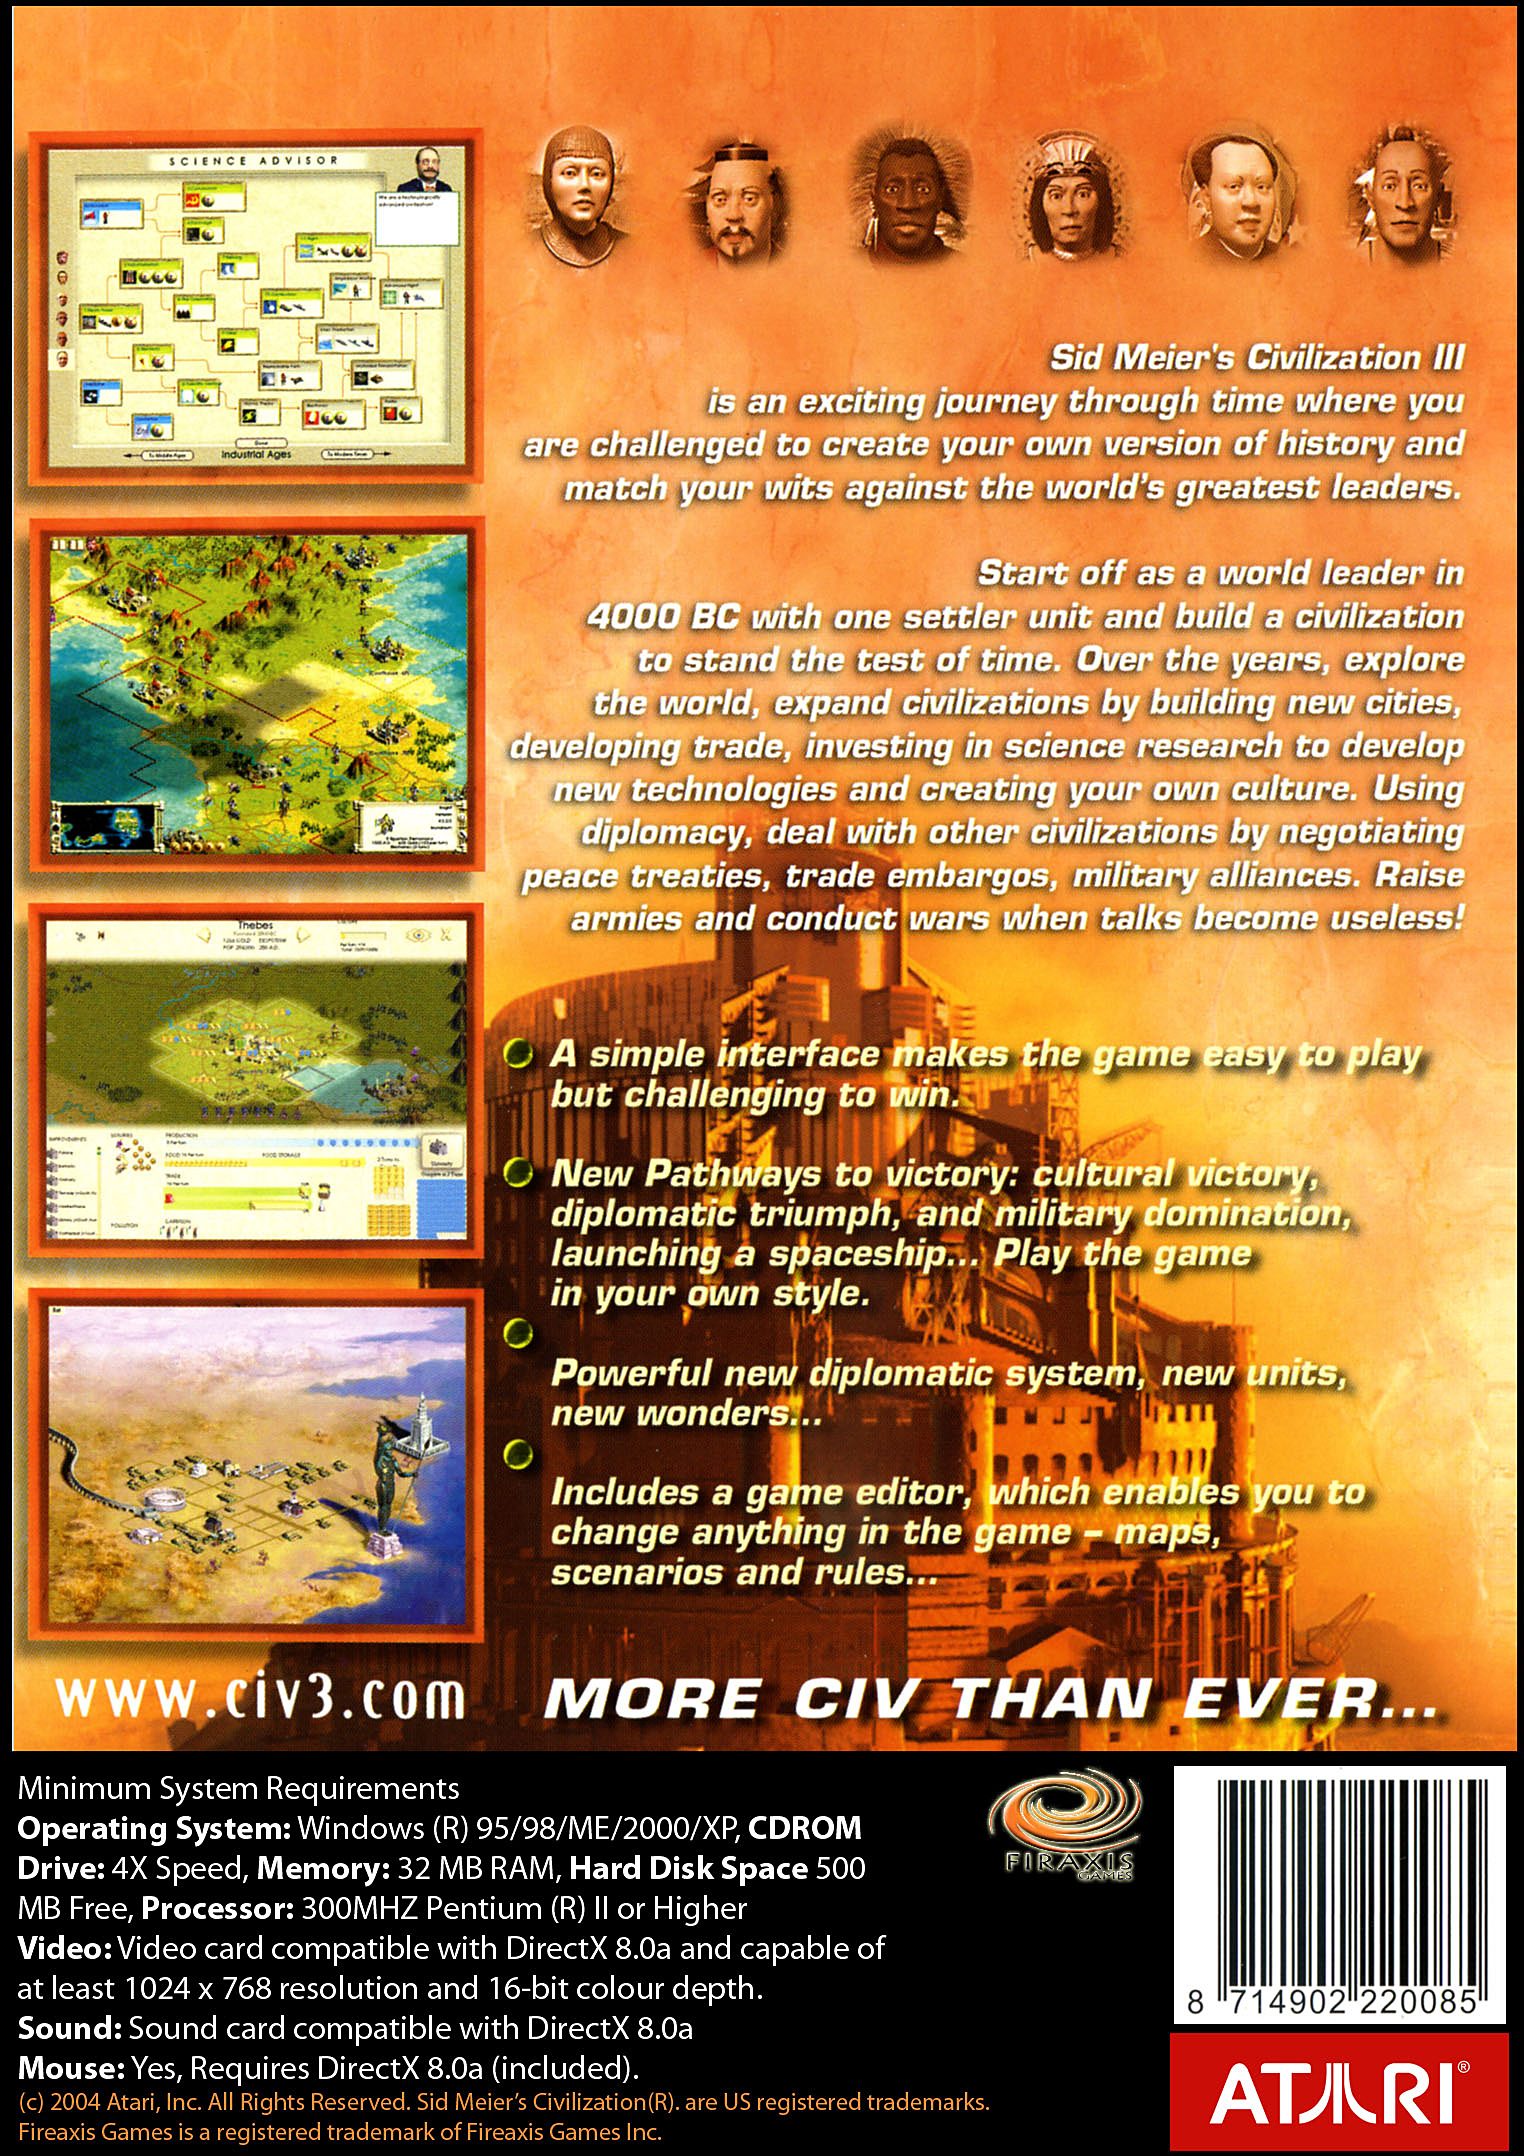 download the new for android Sid Meier’s Civilization III